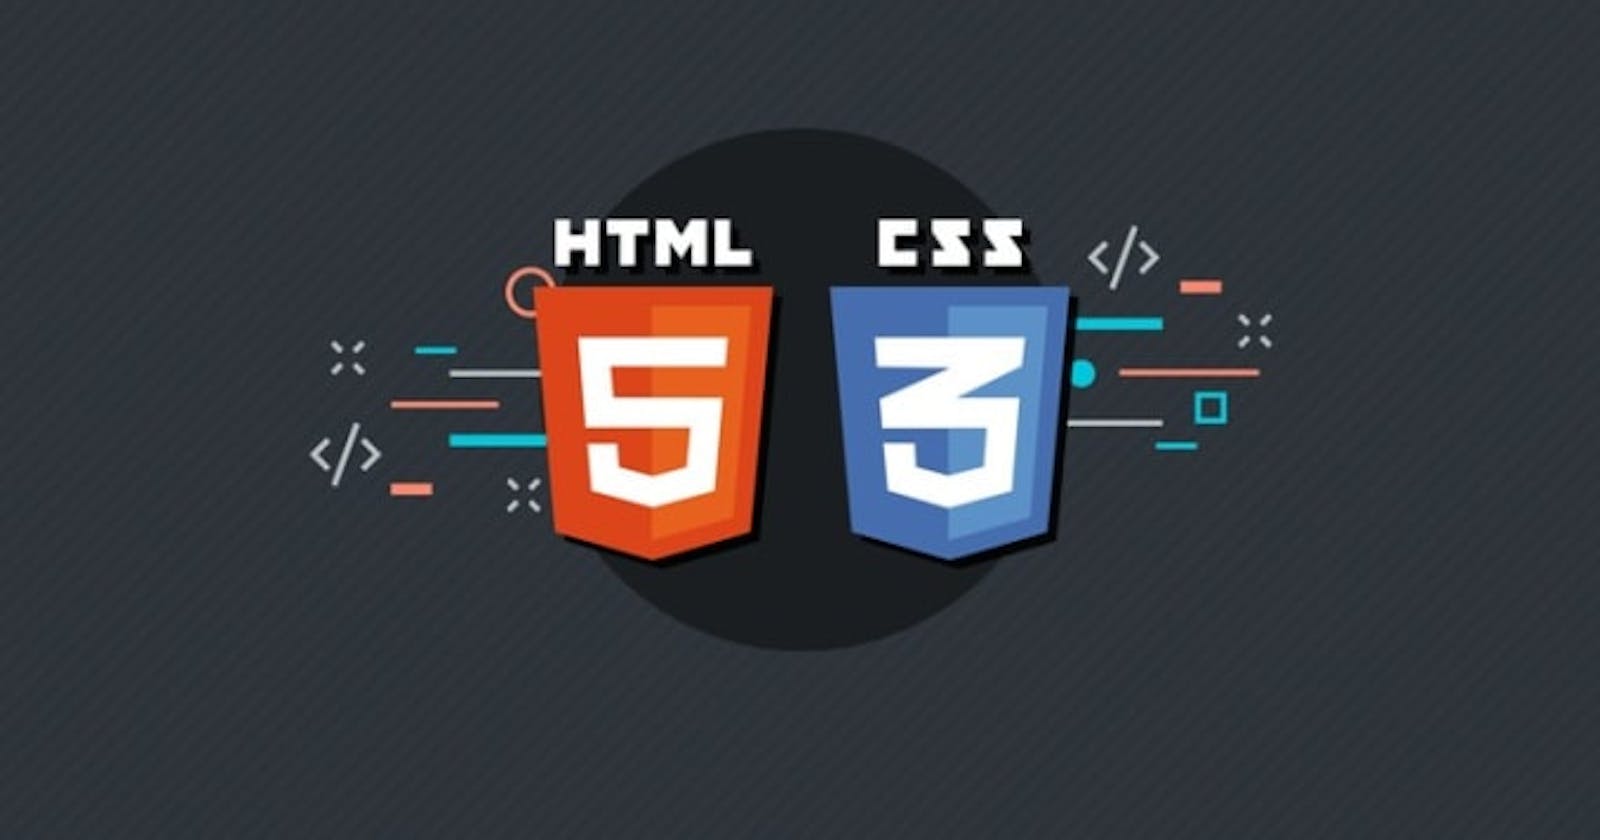 #100DaysofCode Chapter 1 ~ HTML and CSS Basics